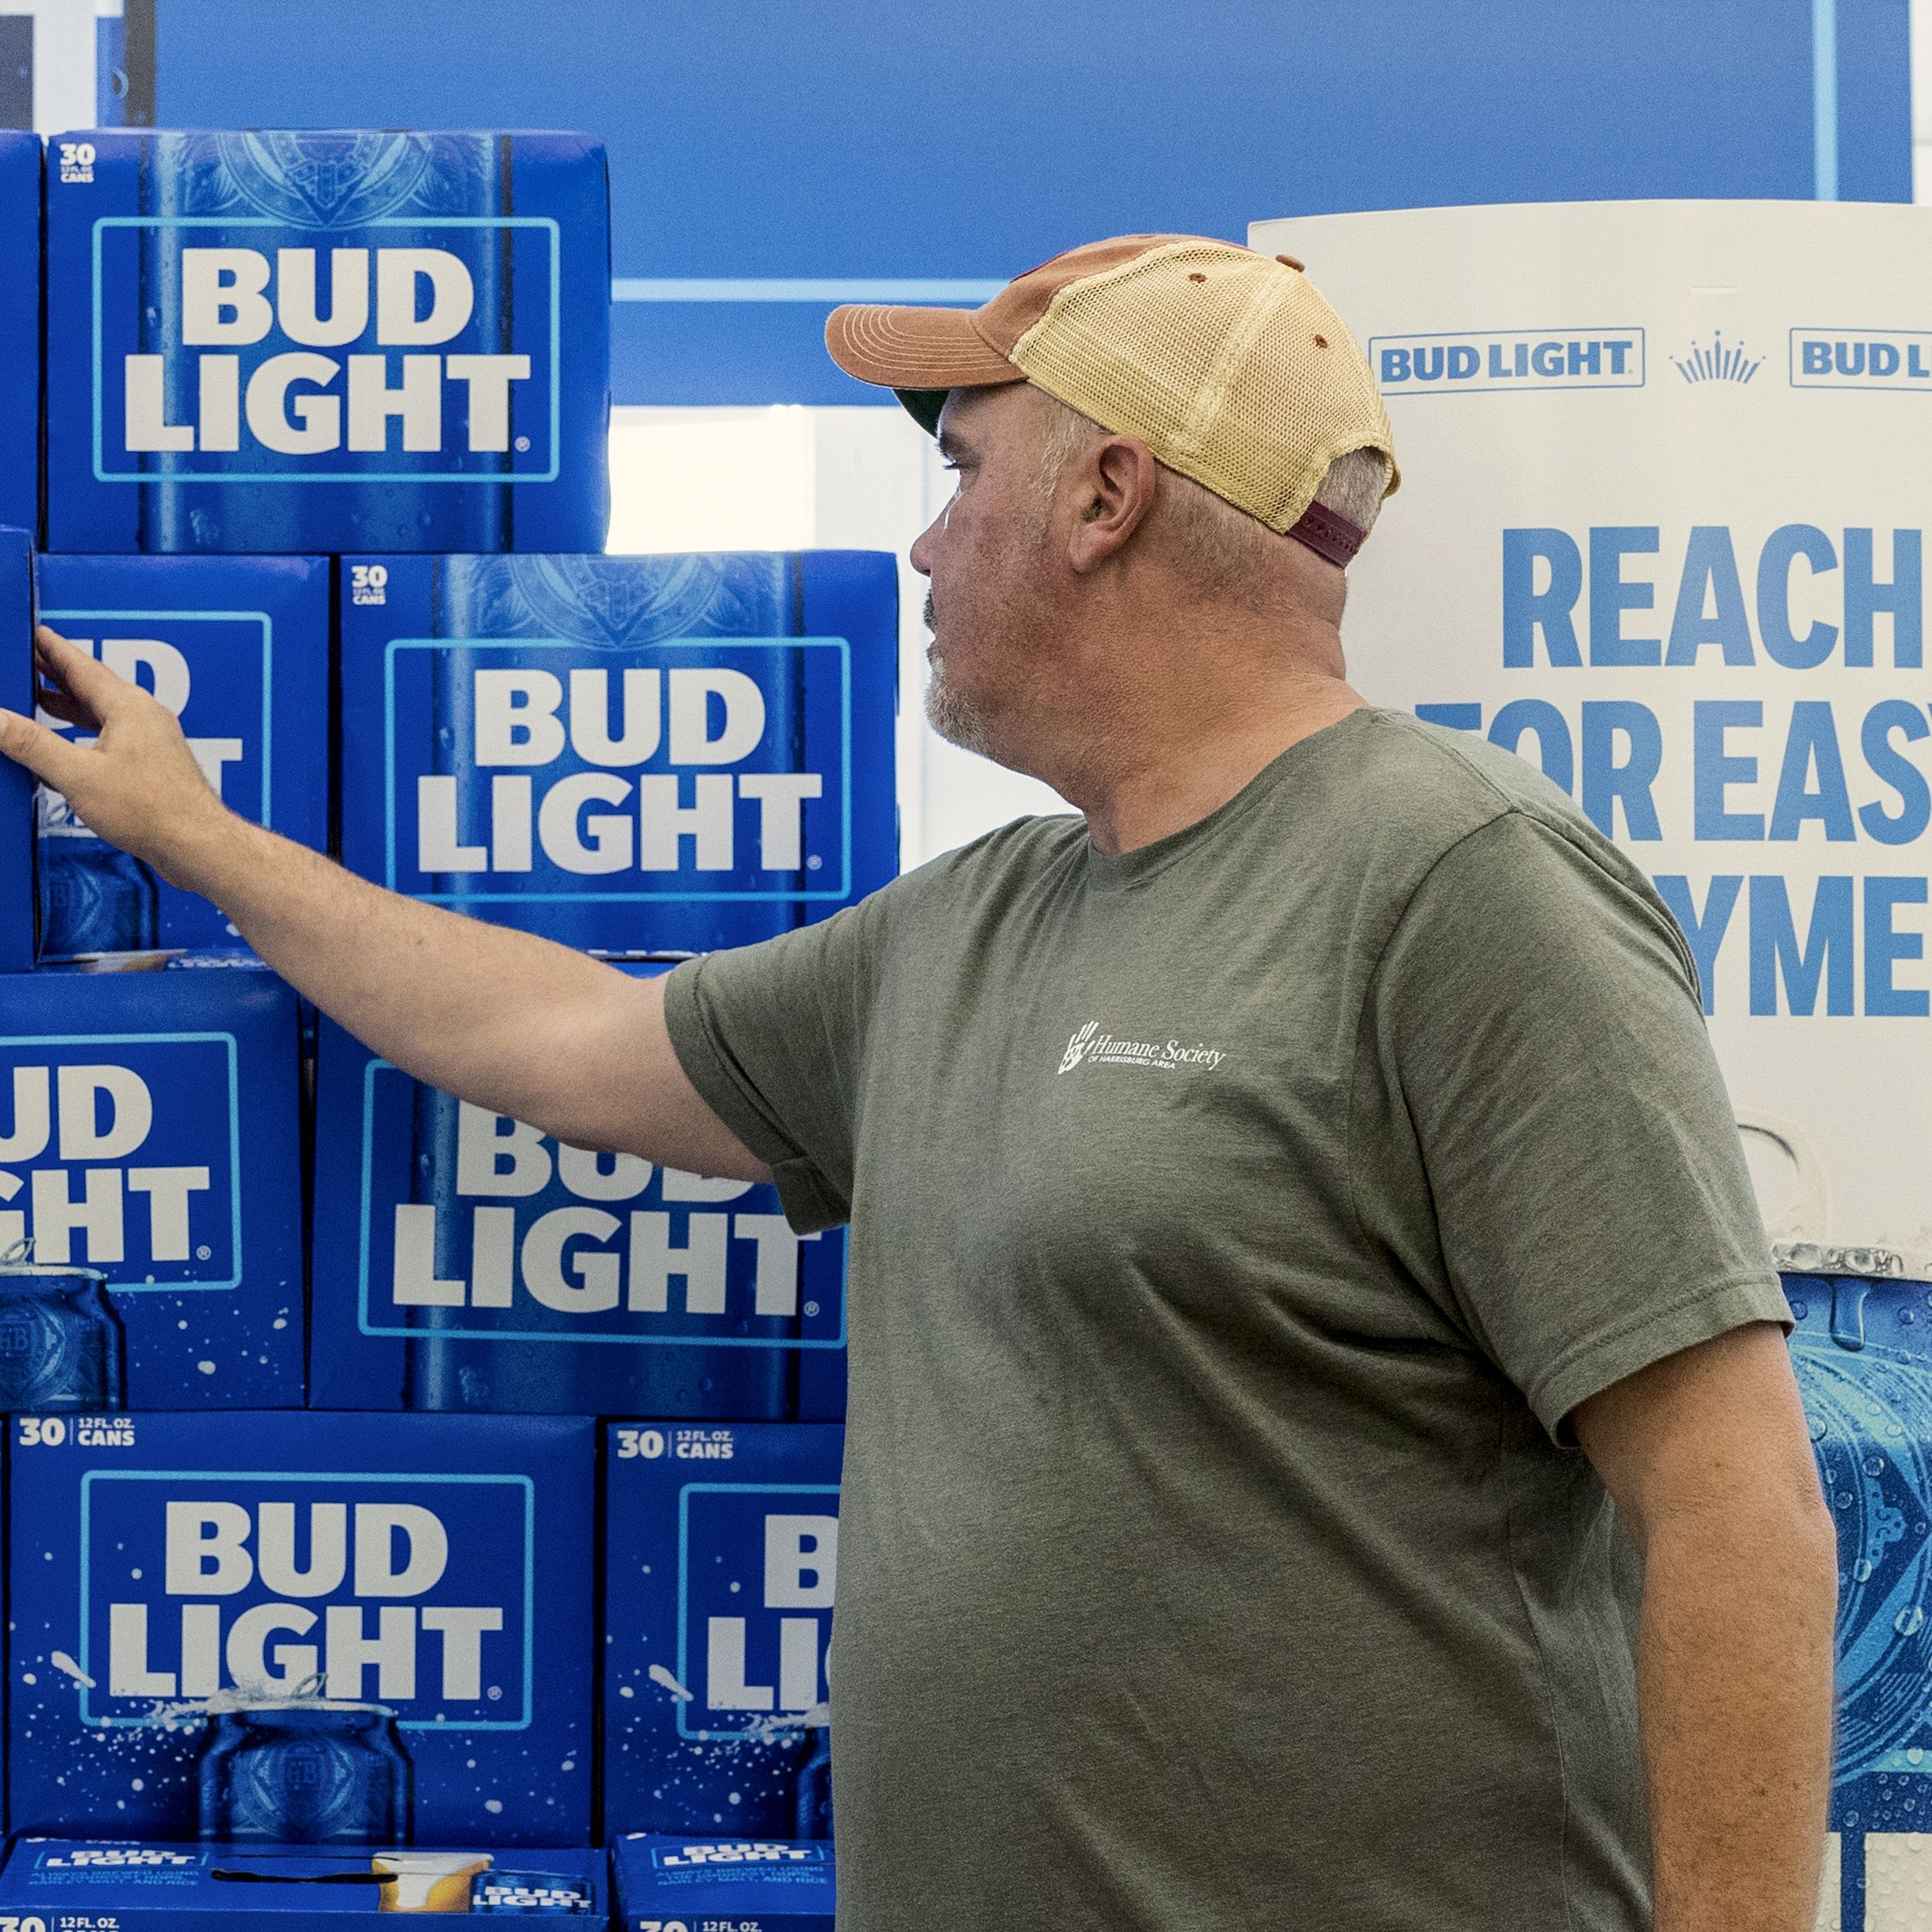 Fall in Bud Light Sales Puts Dent in Anheuser-Busch's Earnings